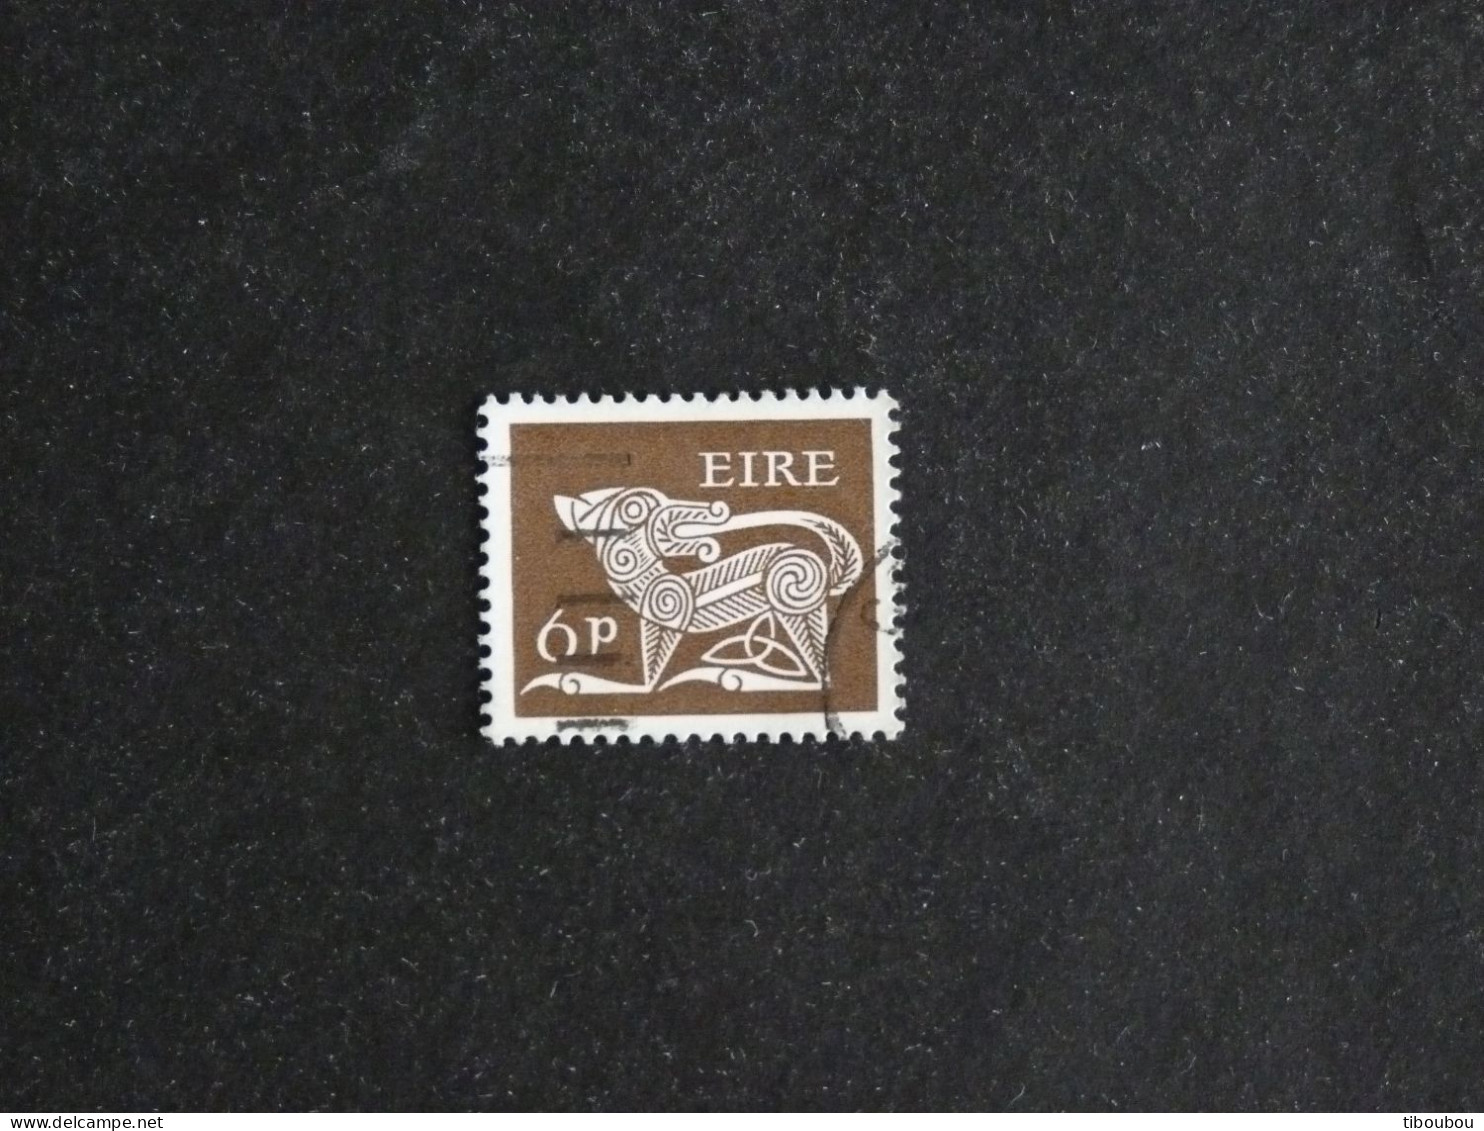 IRLANDE IRELAND EIRE YT 217 OBLITERE - CHIEN STYLISE BROCHE ANCIENNE - Used Stamps